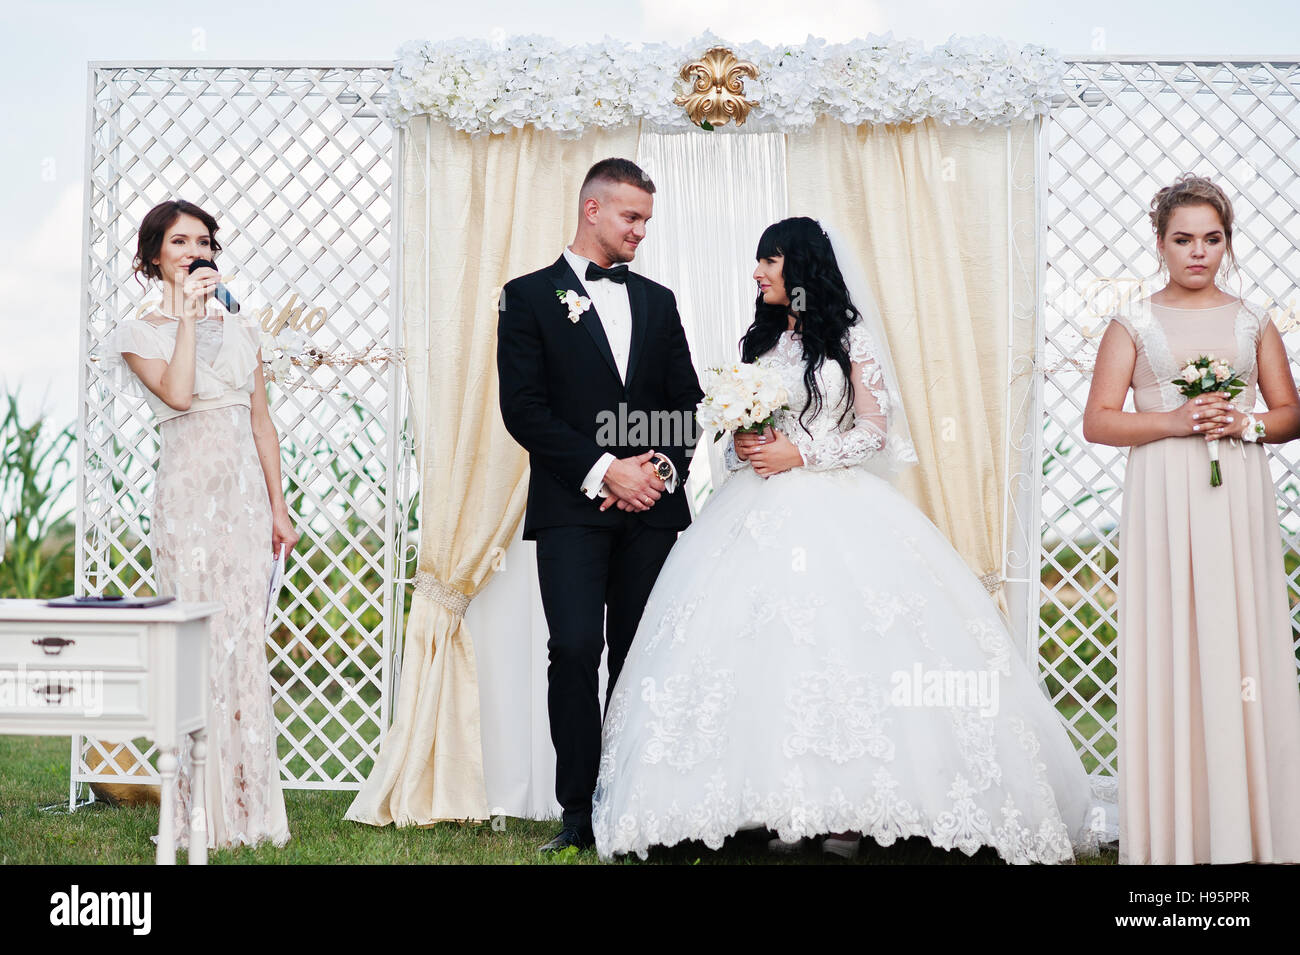 Amazing wedding ceremony with master of ceremonies, wedding couple and best mans with bridesmaids. Stock Photo